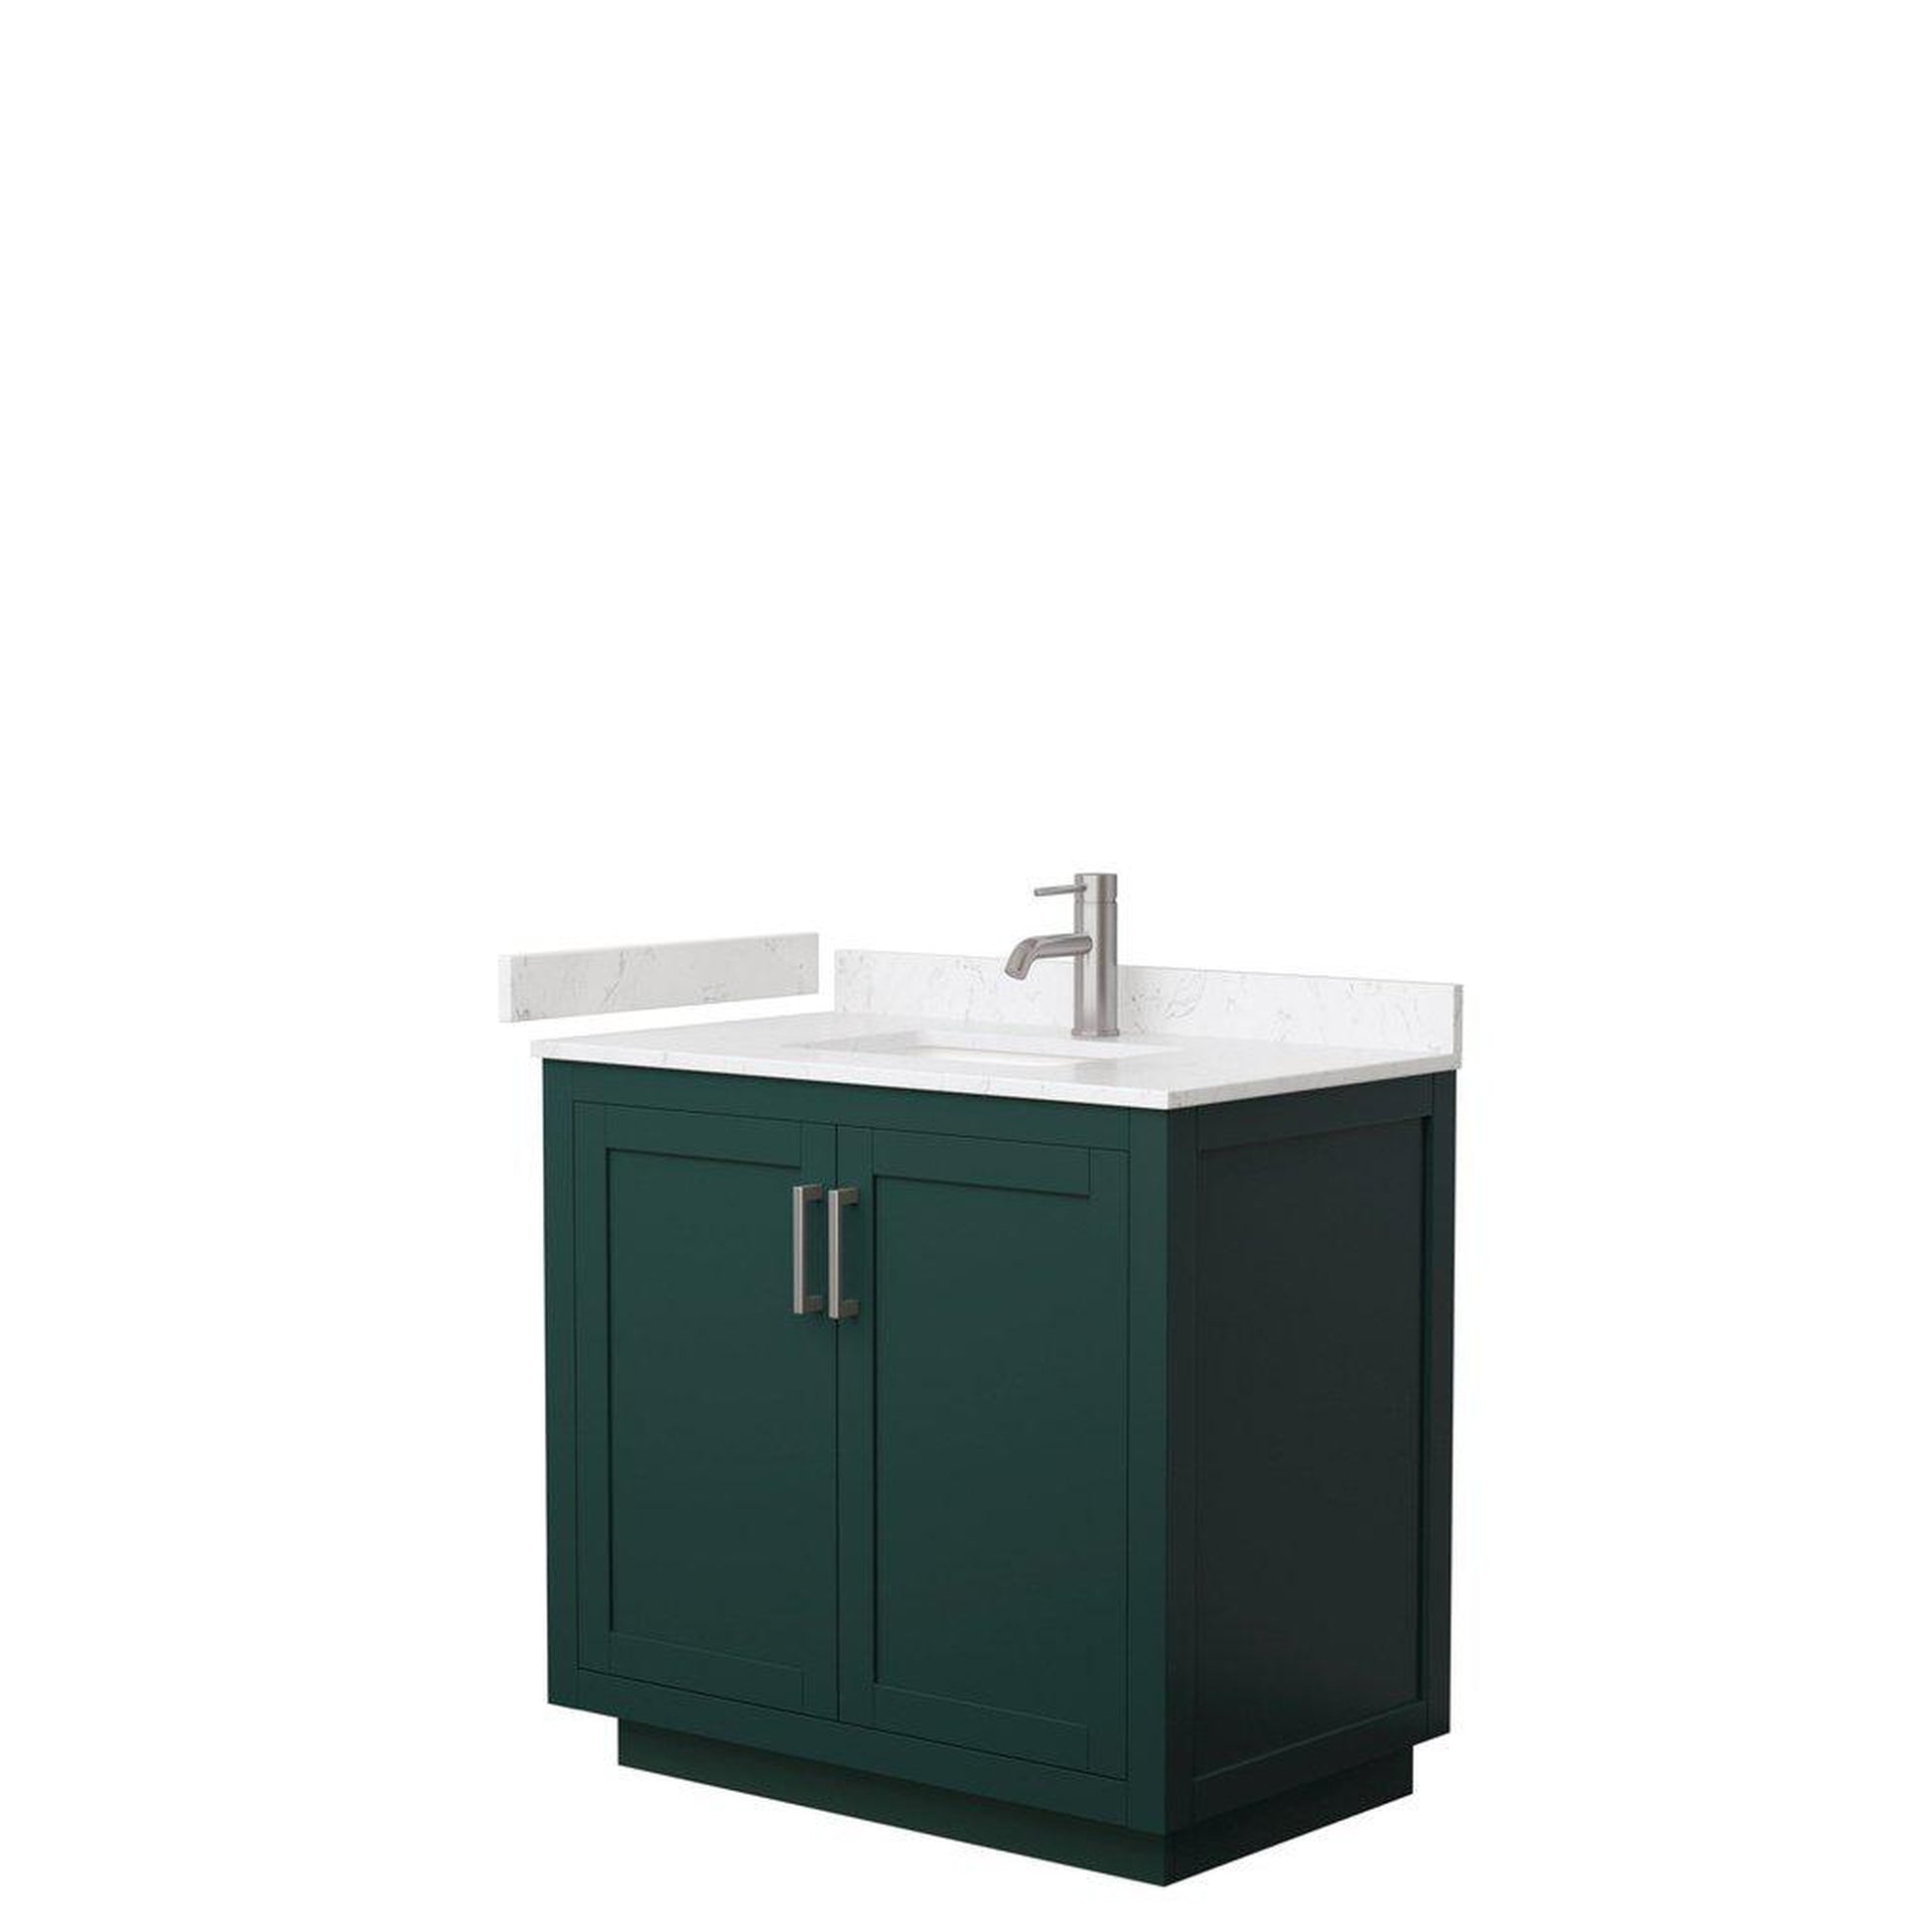 Wyndham Collection Miranda 36" Single Bathroom Green Vanity Set With Light-Vein Carrara Cultured Marble Countertop, Undermount Square Sink, And Brushed Nickel Trim